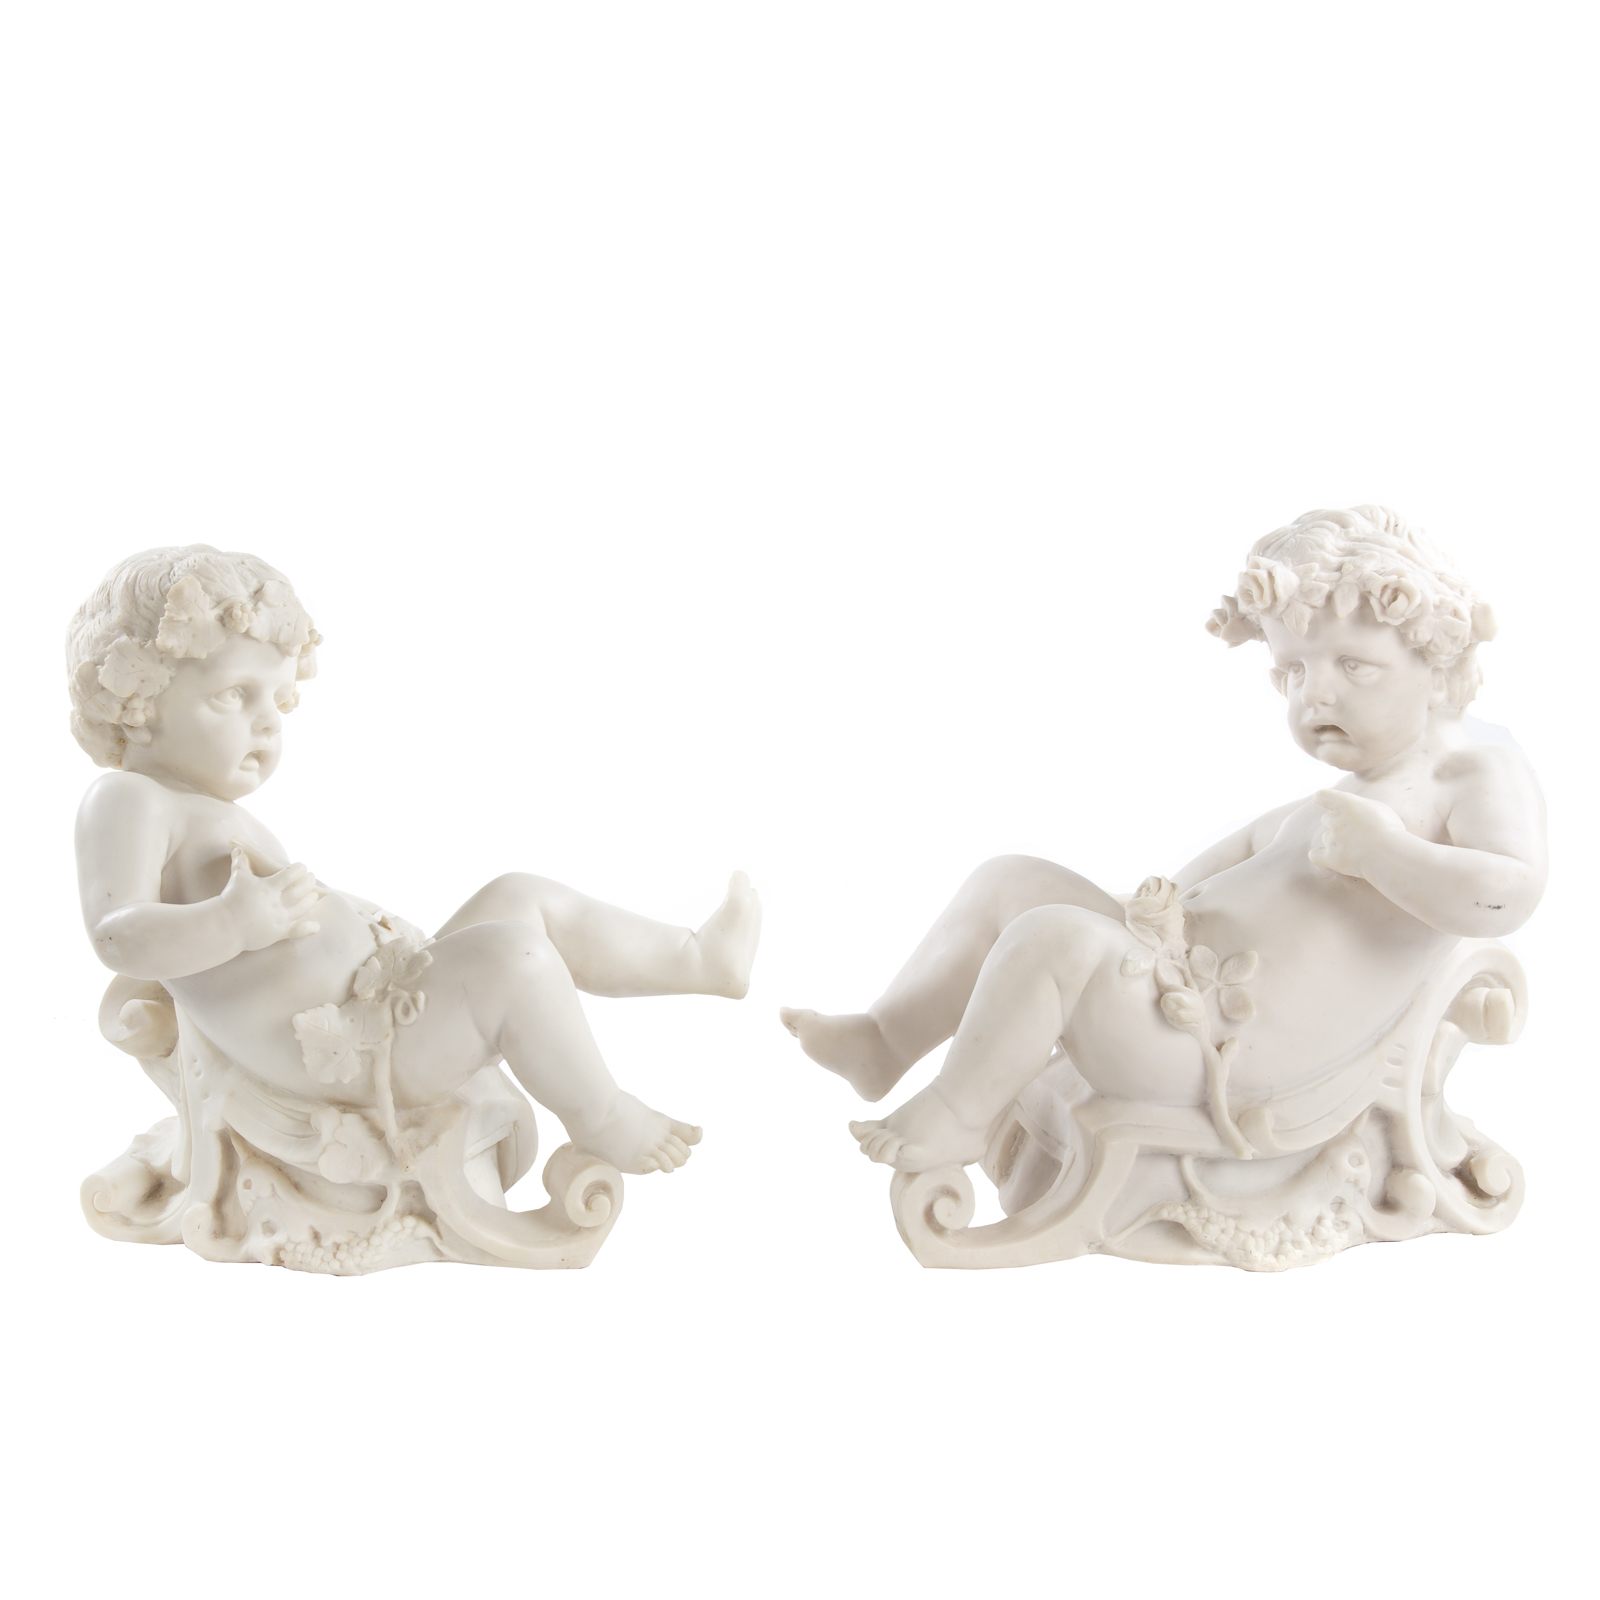 A PAIR OF PUTTI FIGURES 20th century;